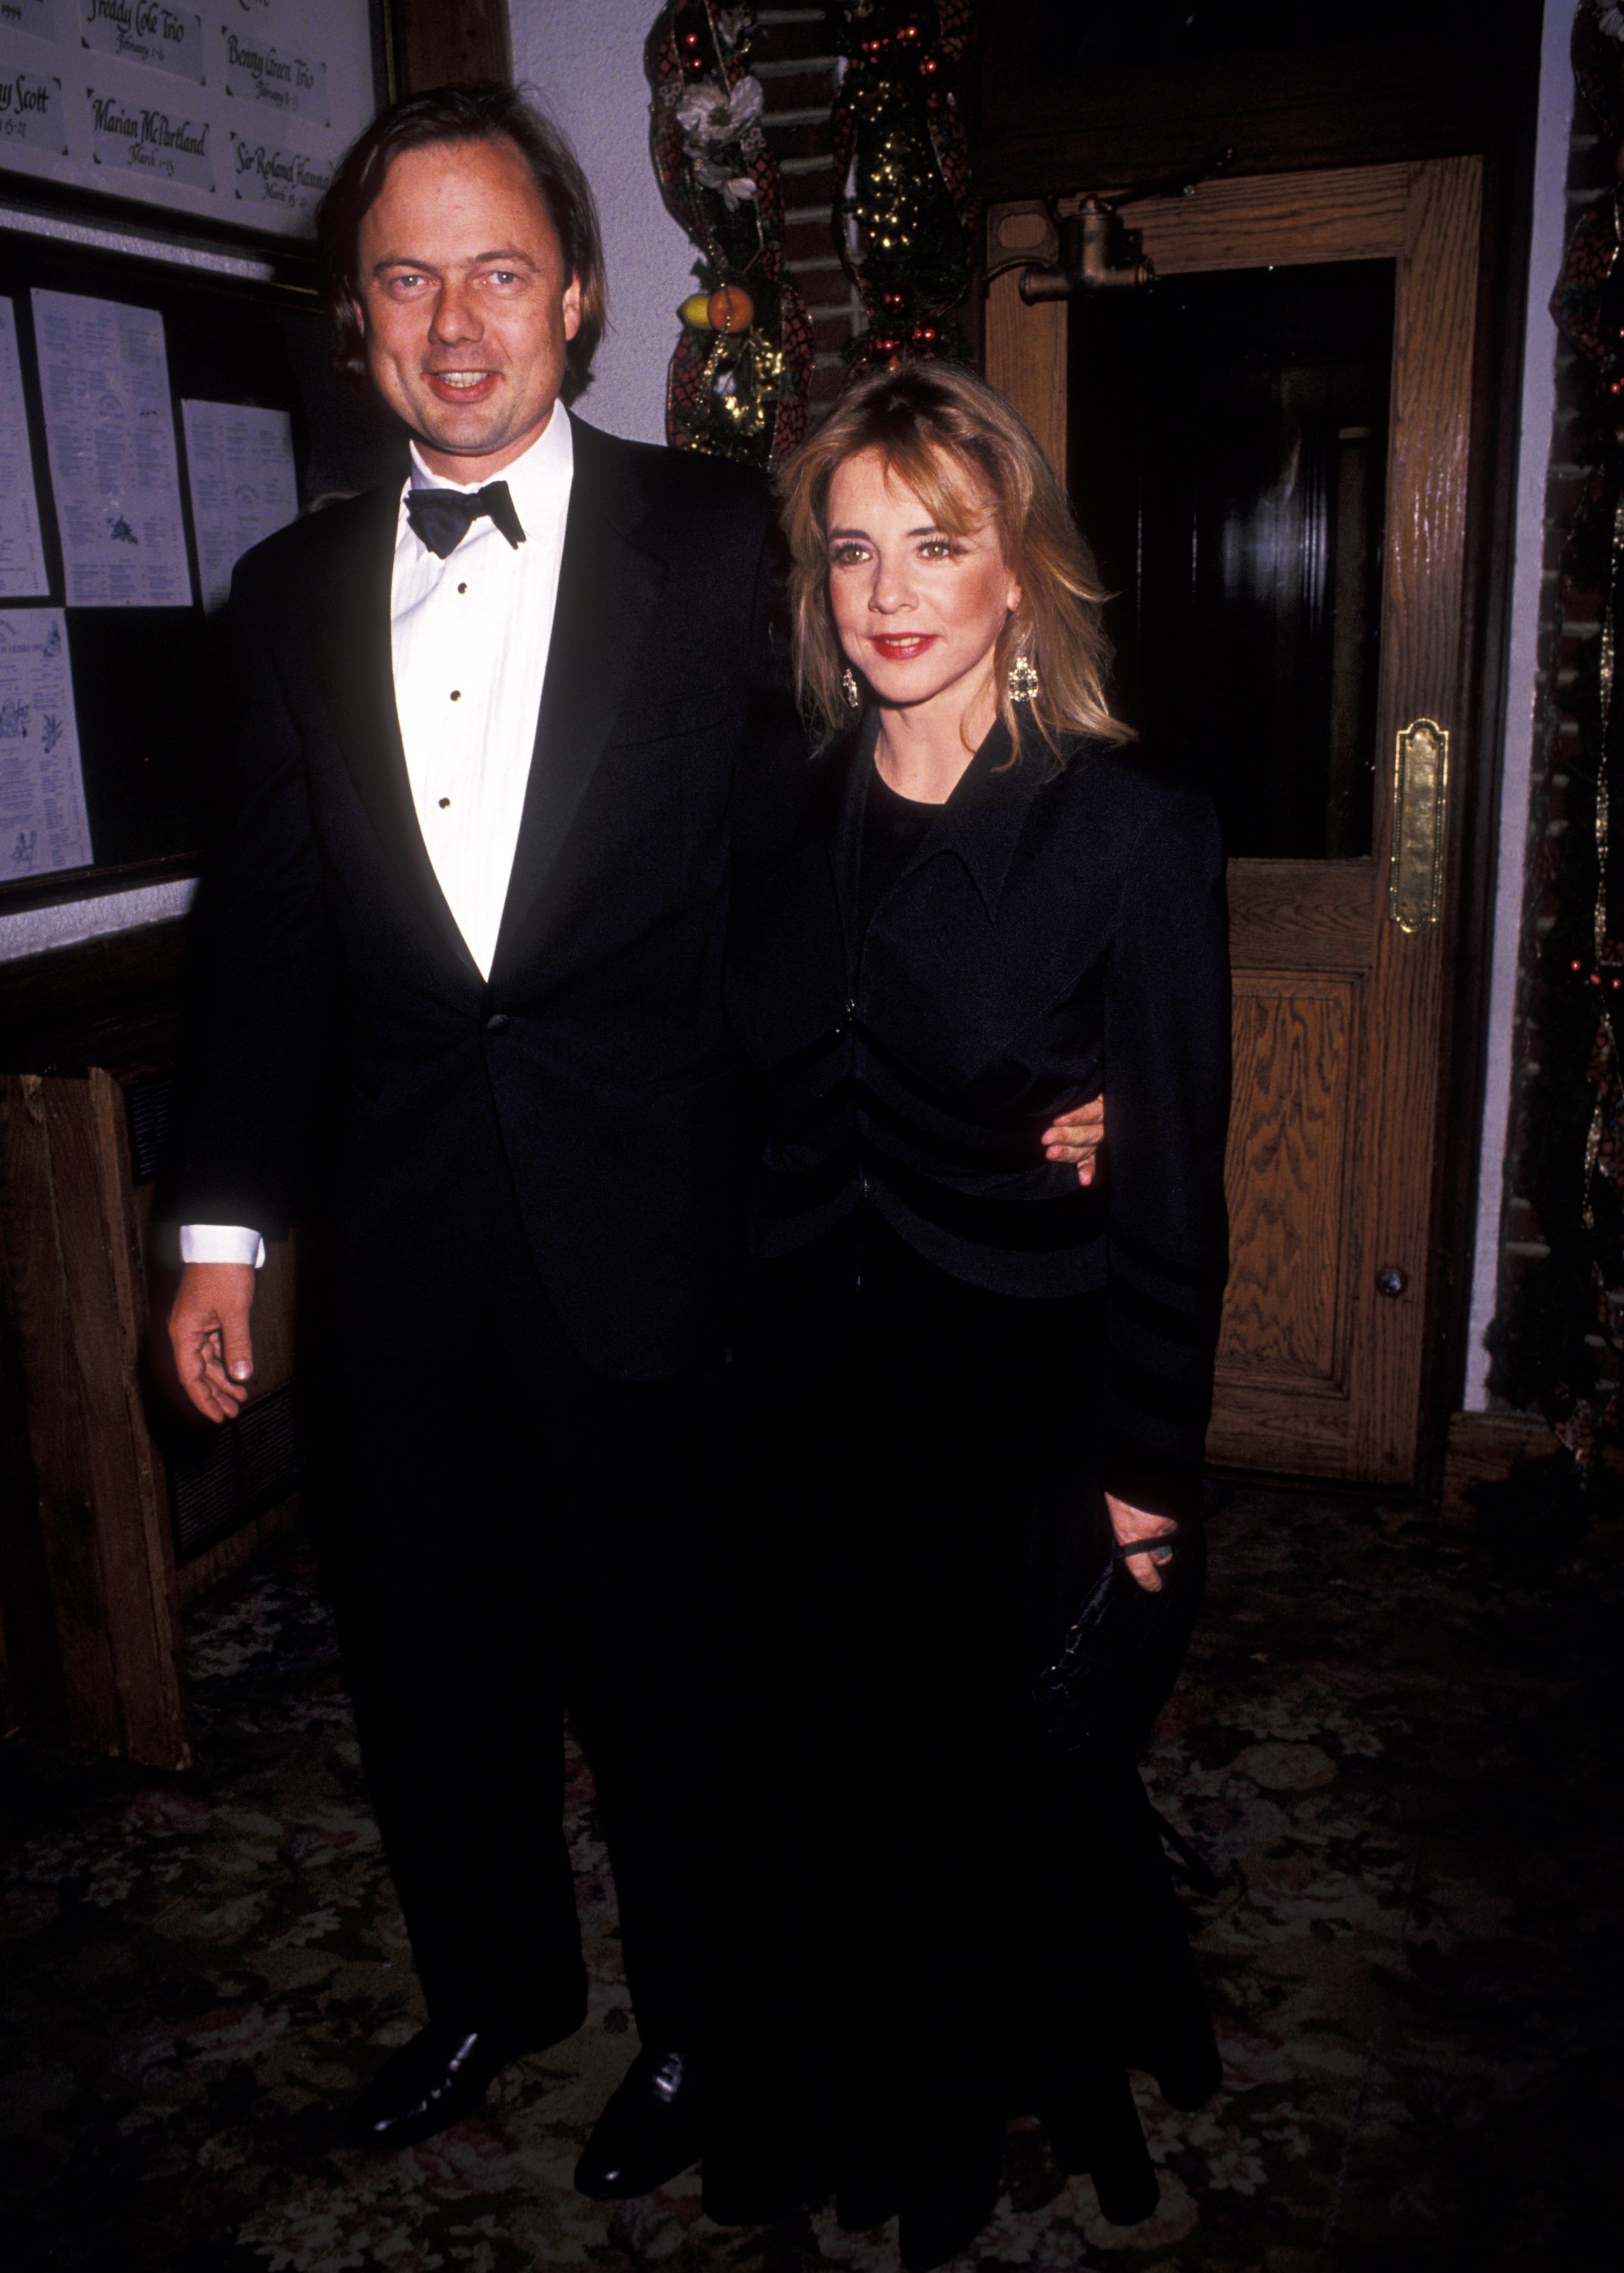 Stockard Channing and Daniel Gillham at Tavern on the Green in New York City, New York, United States | Source: Getty Images